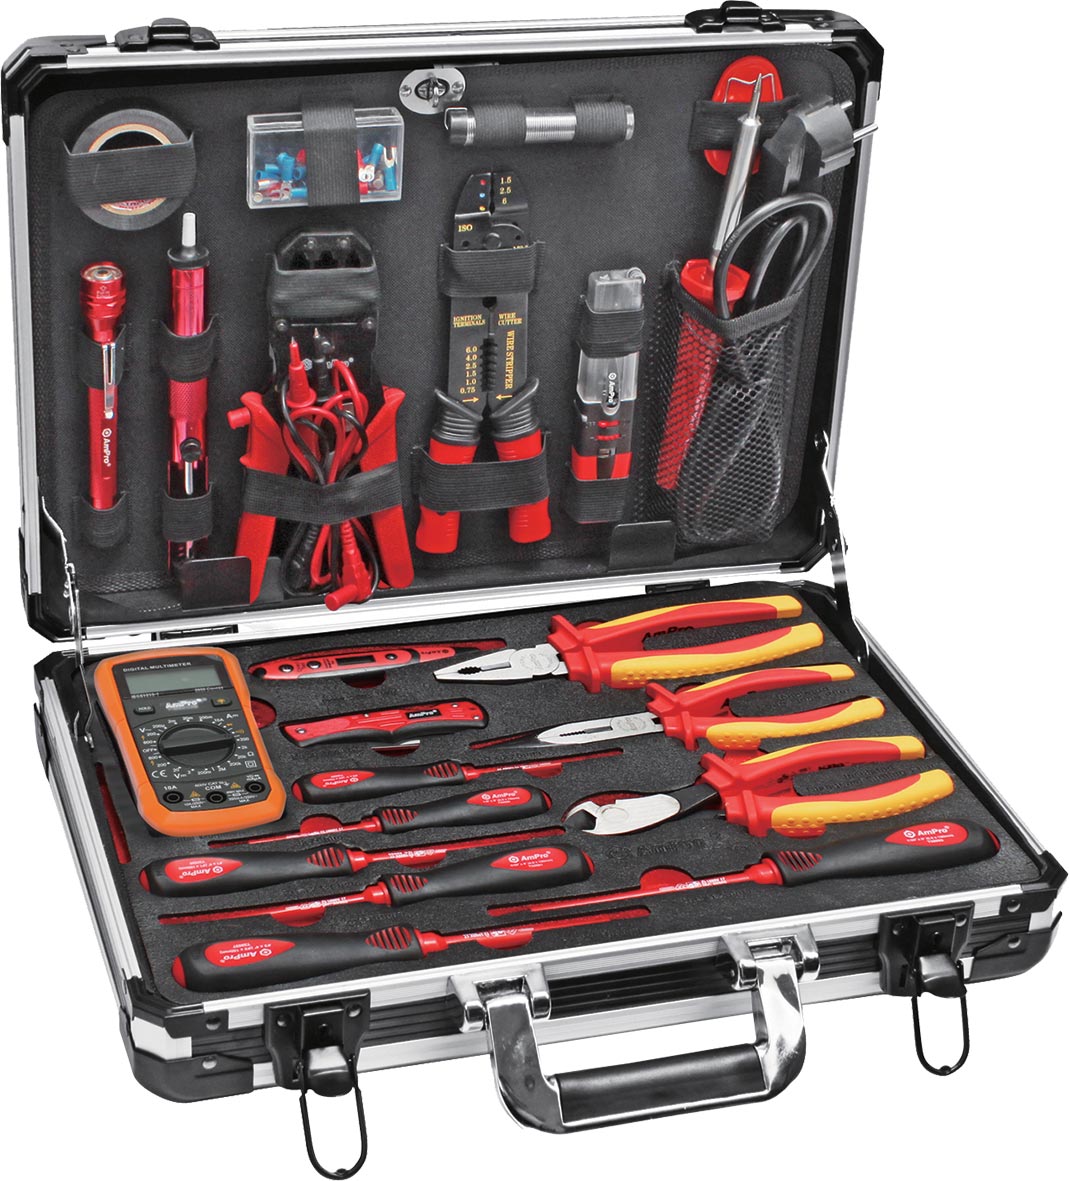 Electrical Tool Set – AmpPro